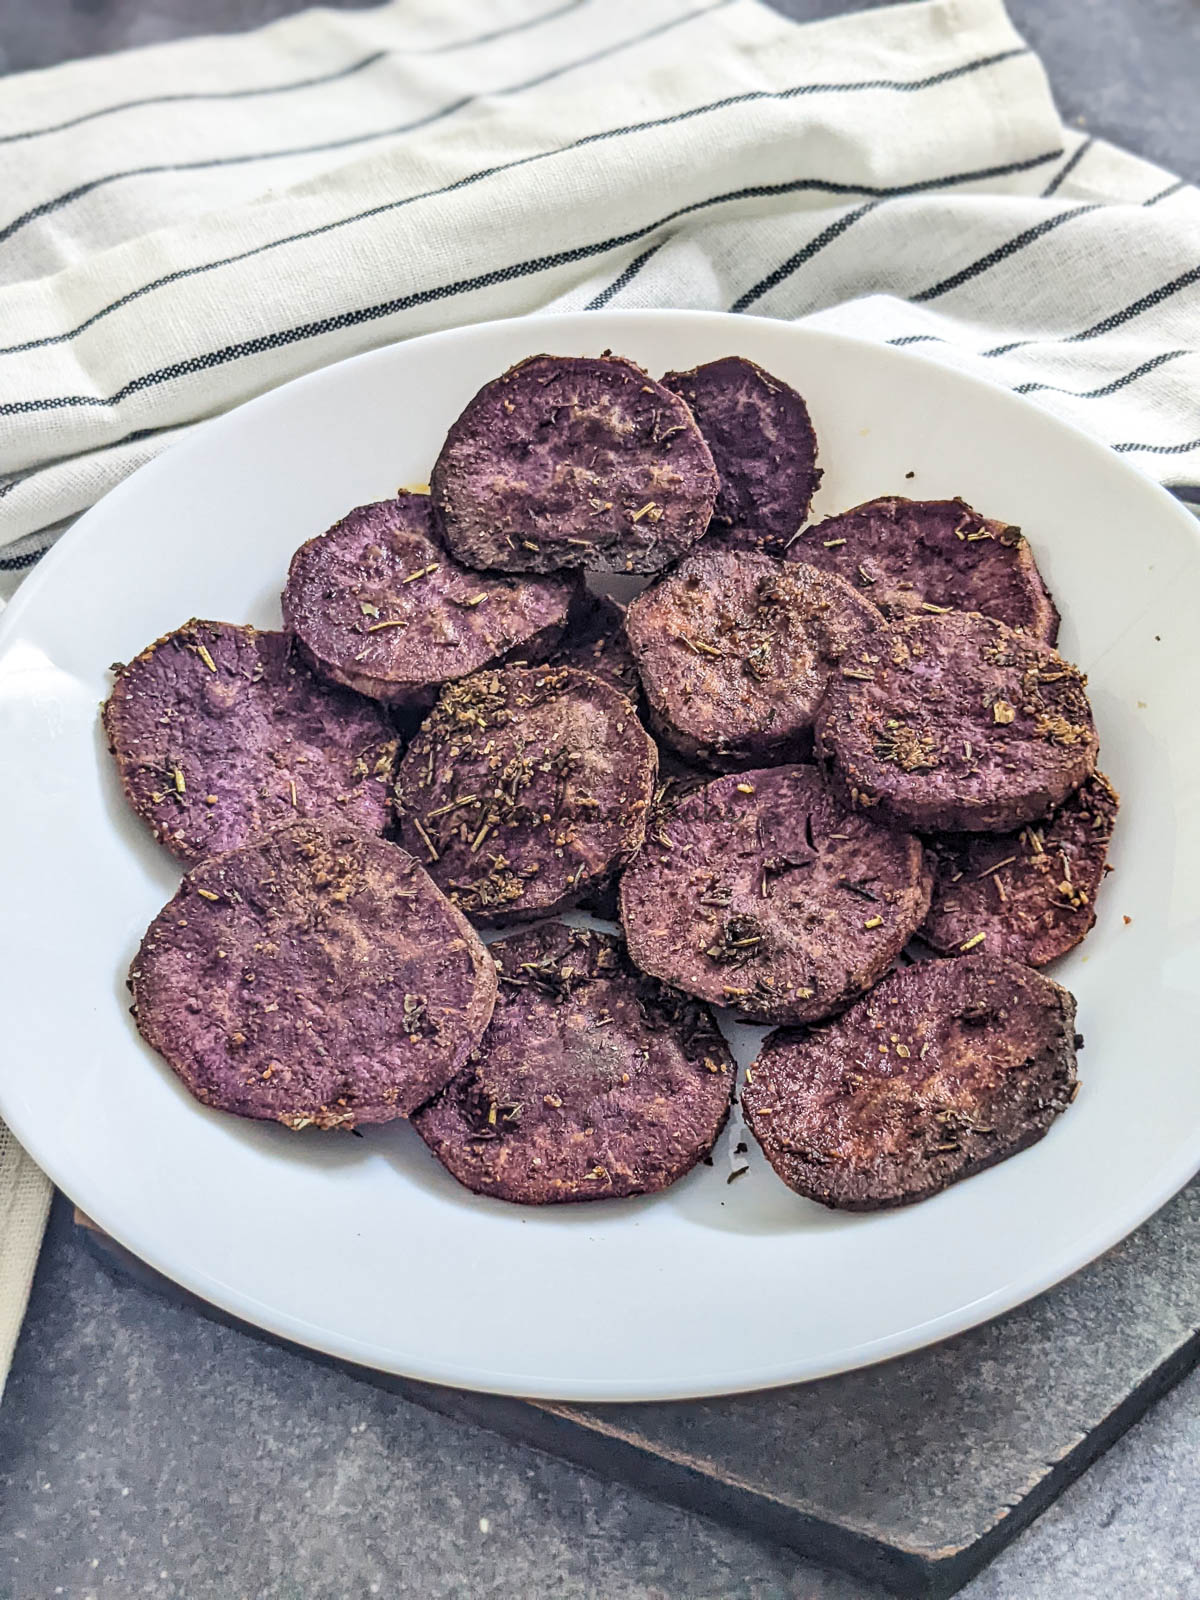 Medium sliced purple sweet potato slices marinated in seasoning and air fried, served on a white plate with a grey background and a napkin visible.